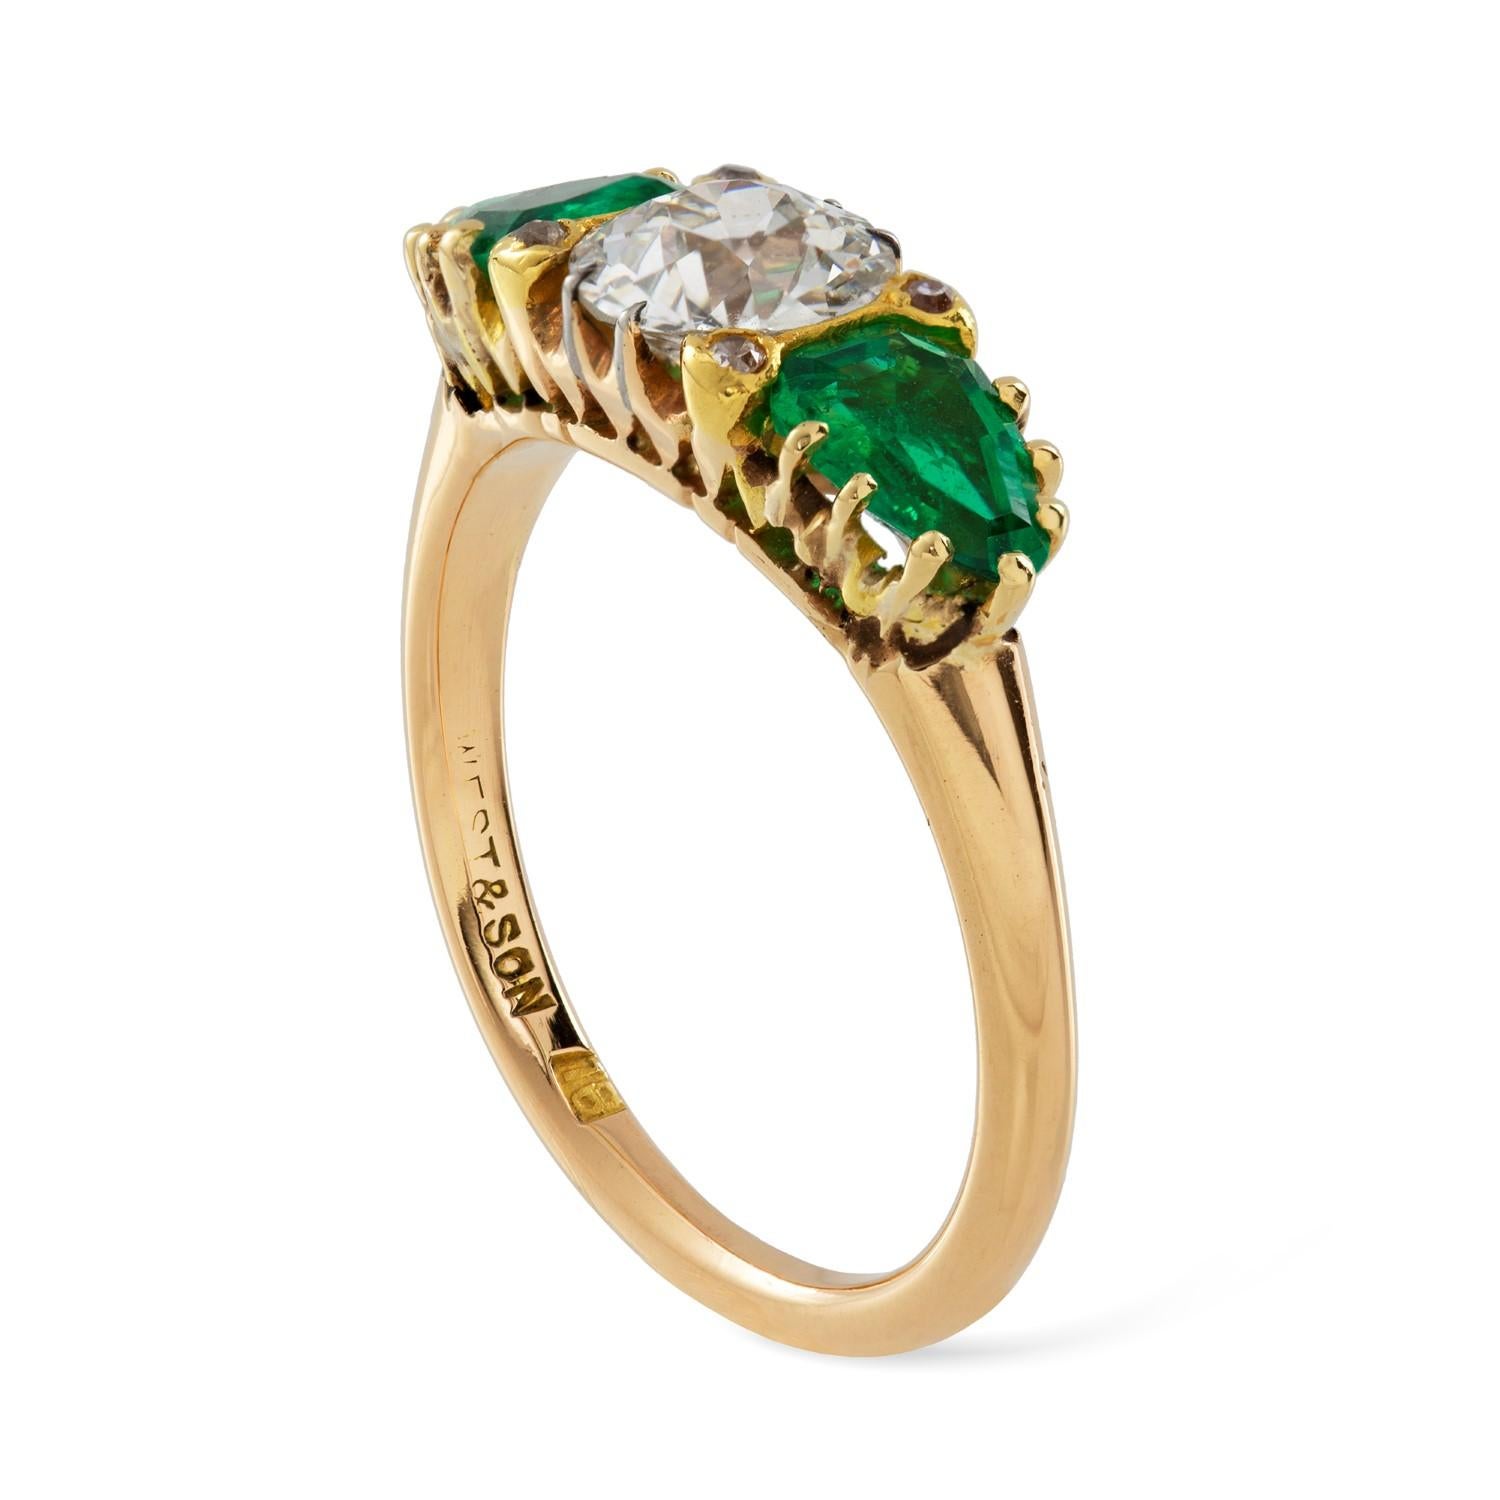 An early 20th century three stone emerald and diamond ring, the old European-cut diamond estimated to weigh 0.8 carats, set between two shield-shaped emeralds estimated to weigh 0.9 carats in total, accompanied by GCS Report stating to be of